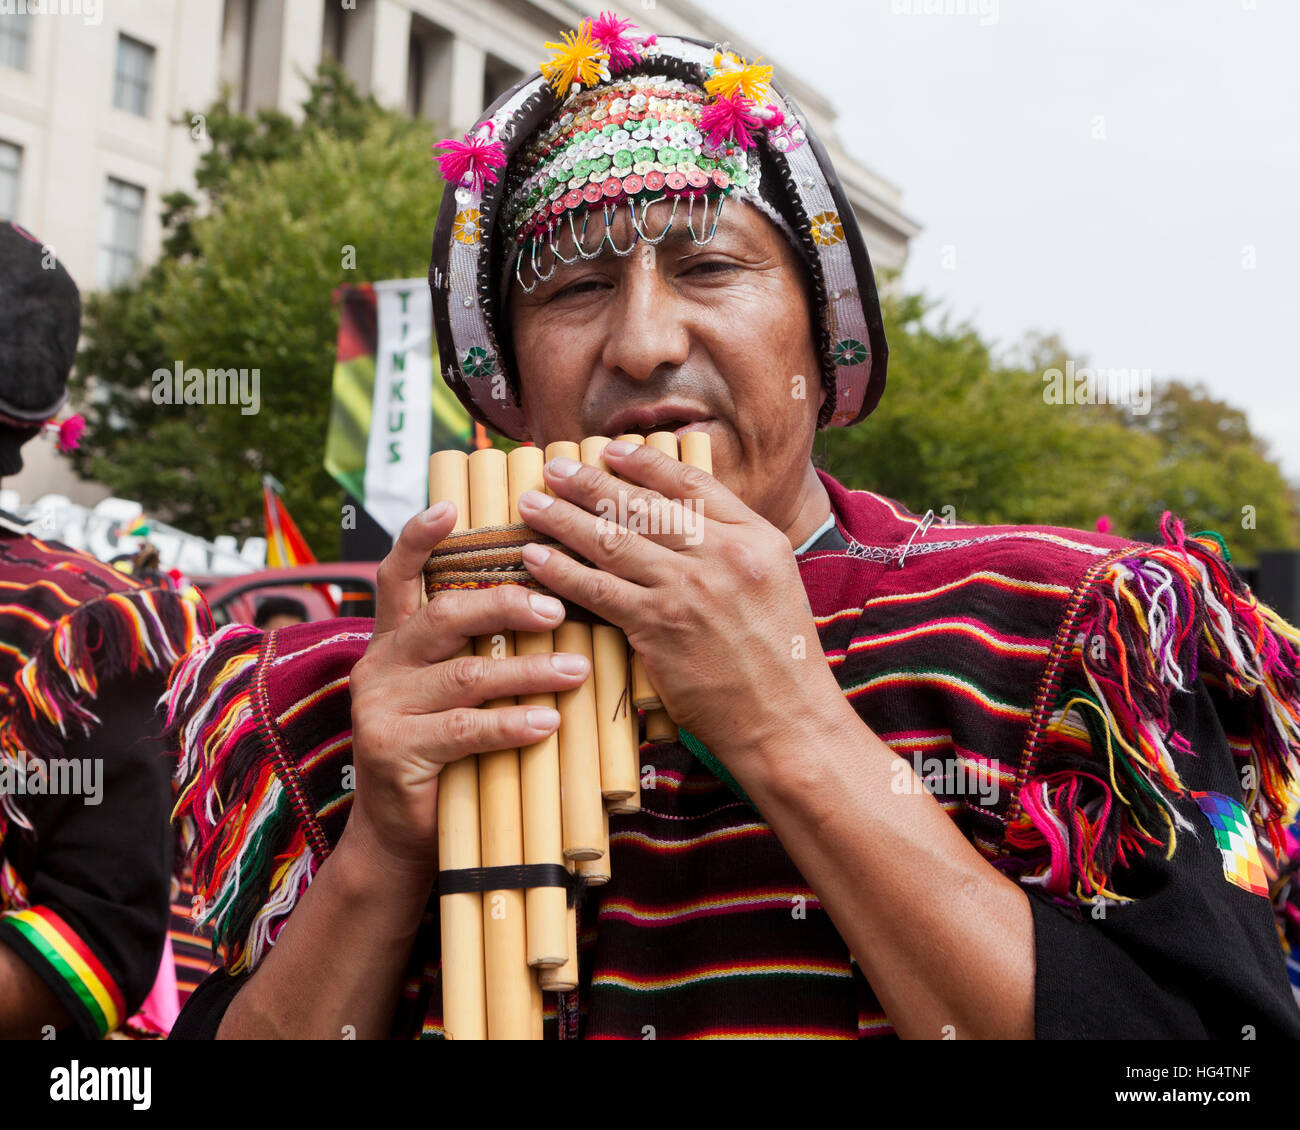 Pan Musician High Resolution Stock Photography and Images - Alamy